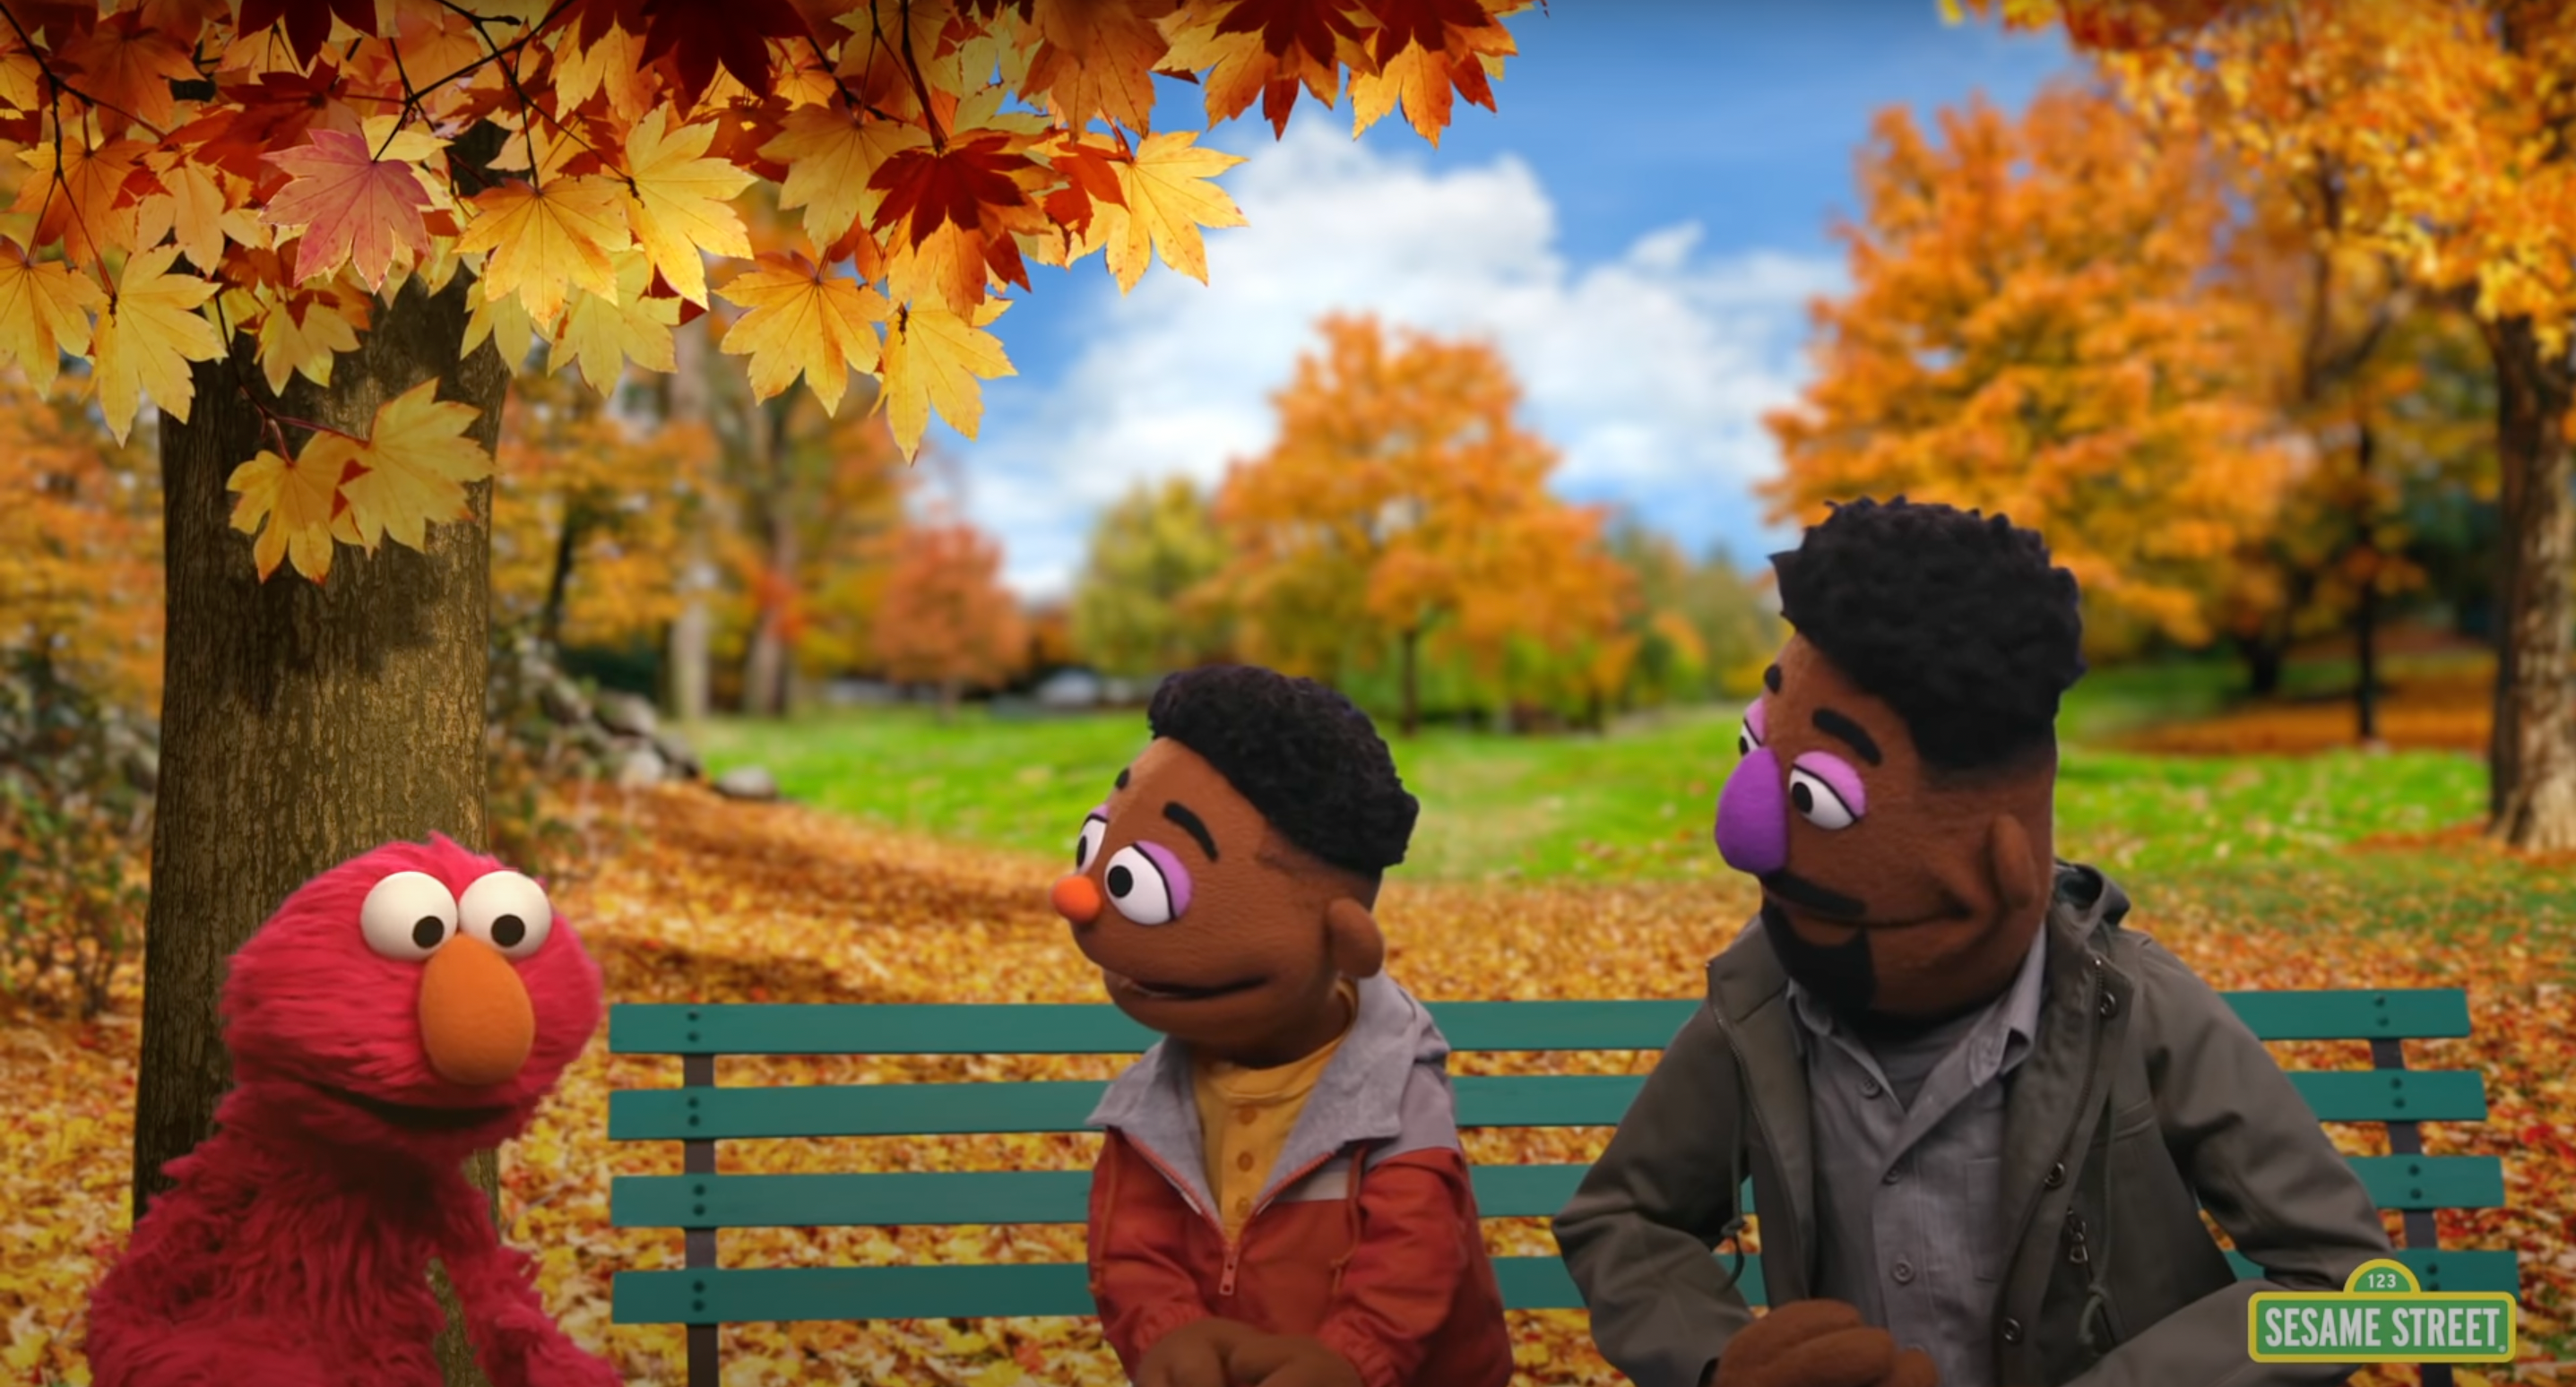 Vila Sésamo presents two Black Muppets to teach Elmo’s skin color ‘an important part of who we are’